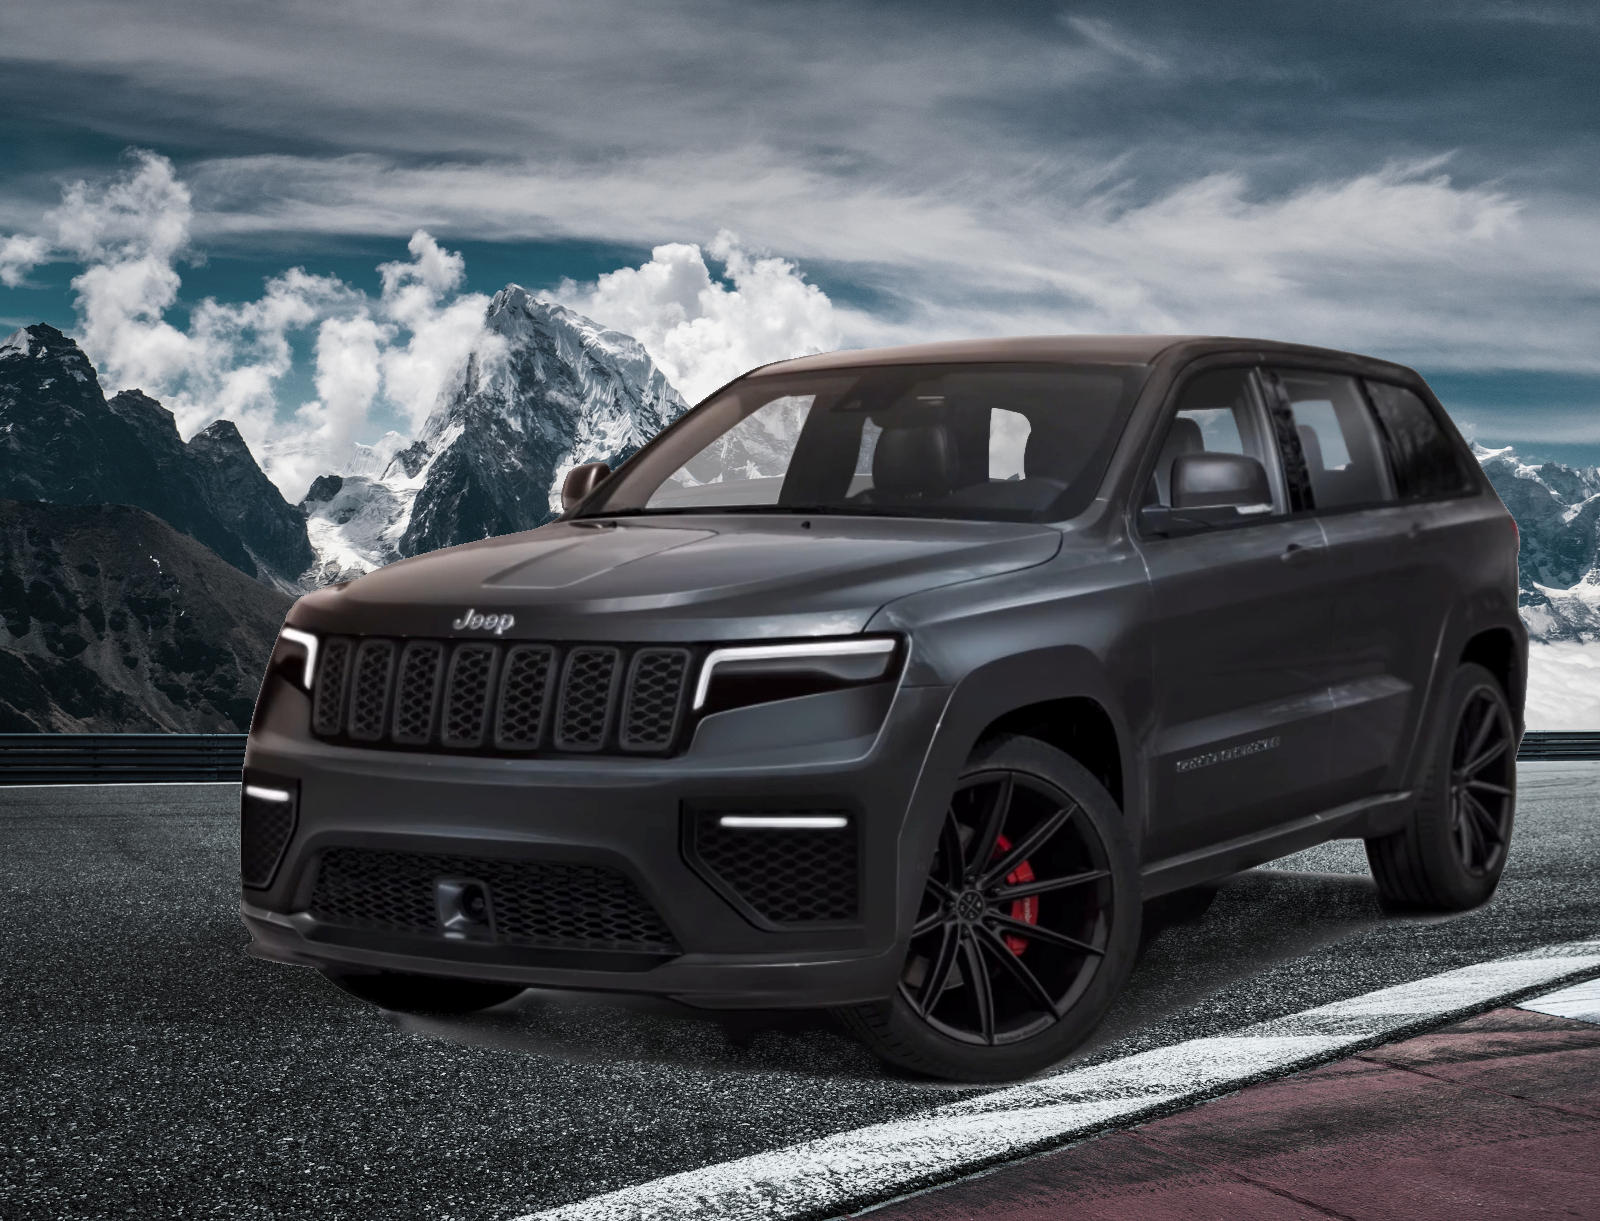 All You Need To Know About The All-New 2021 Jeep Grand Cherokee | CarBuzz